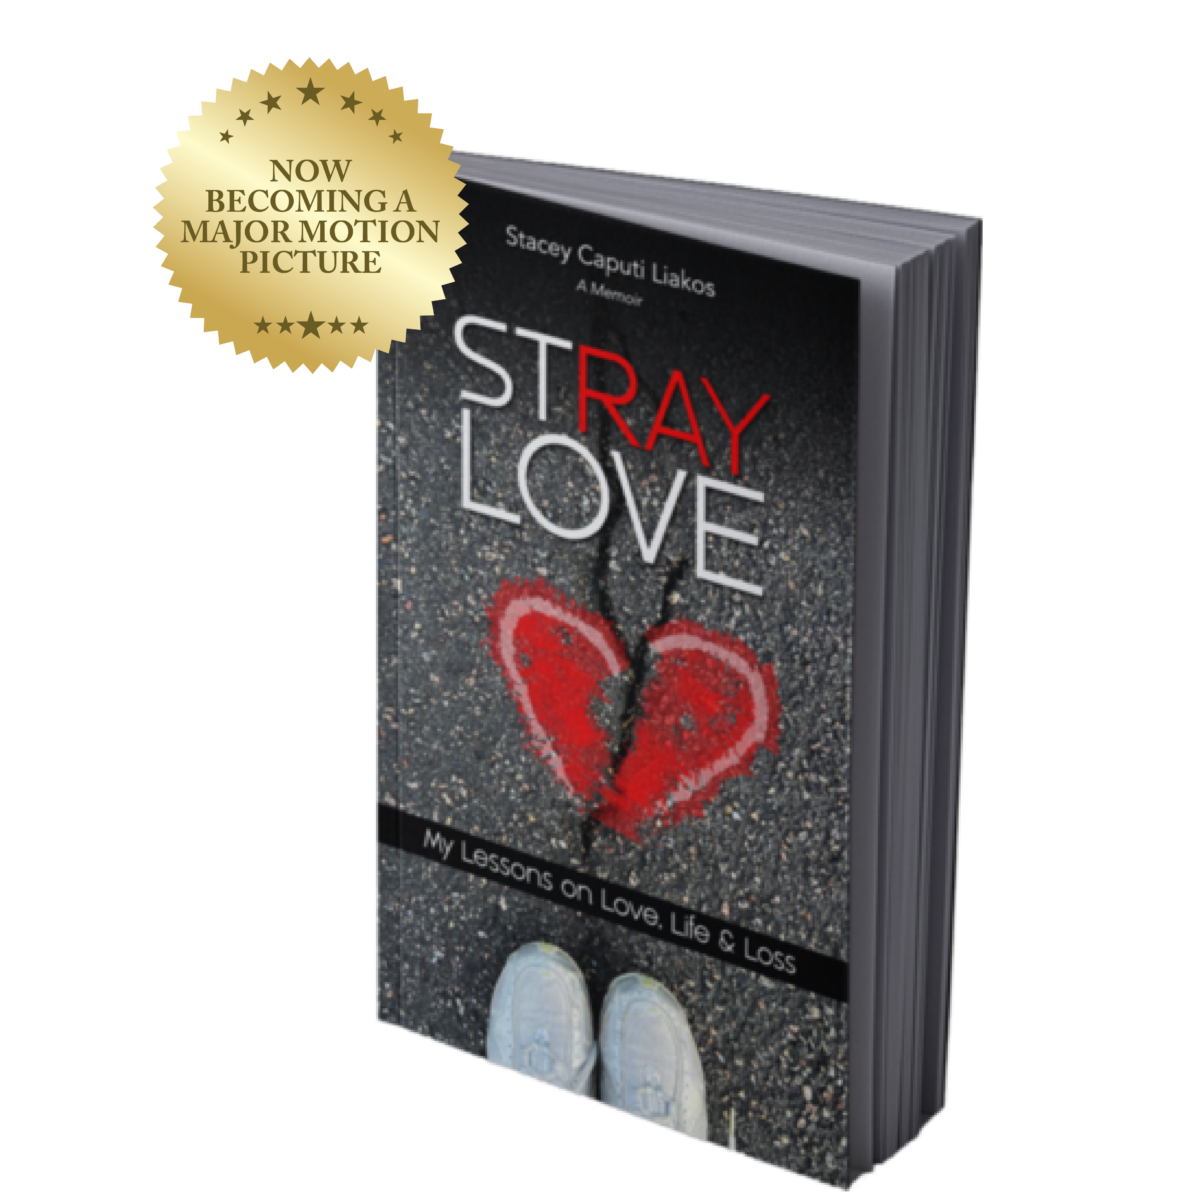 stray love book cover feature